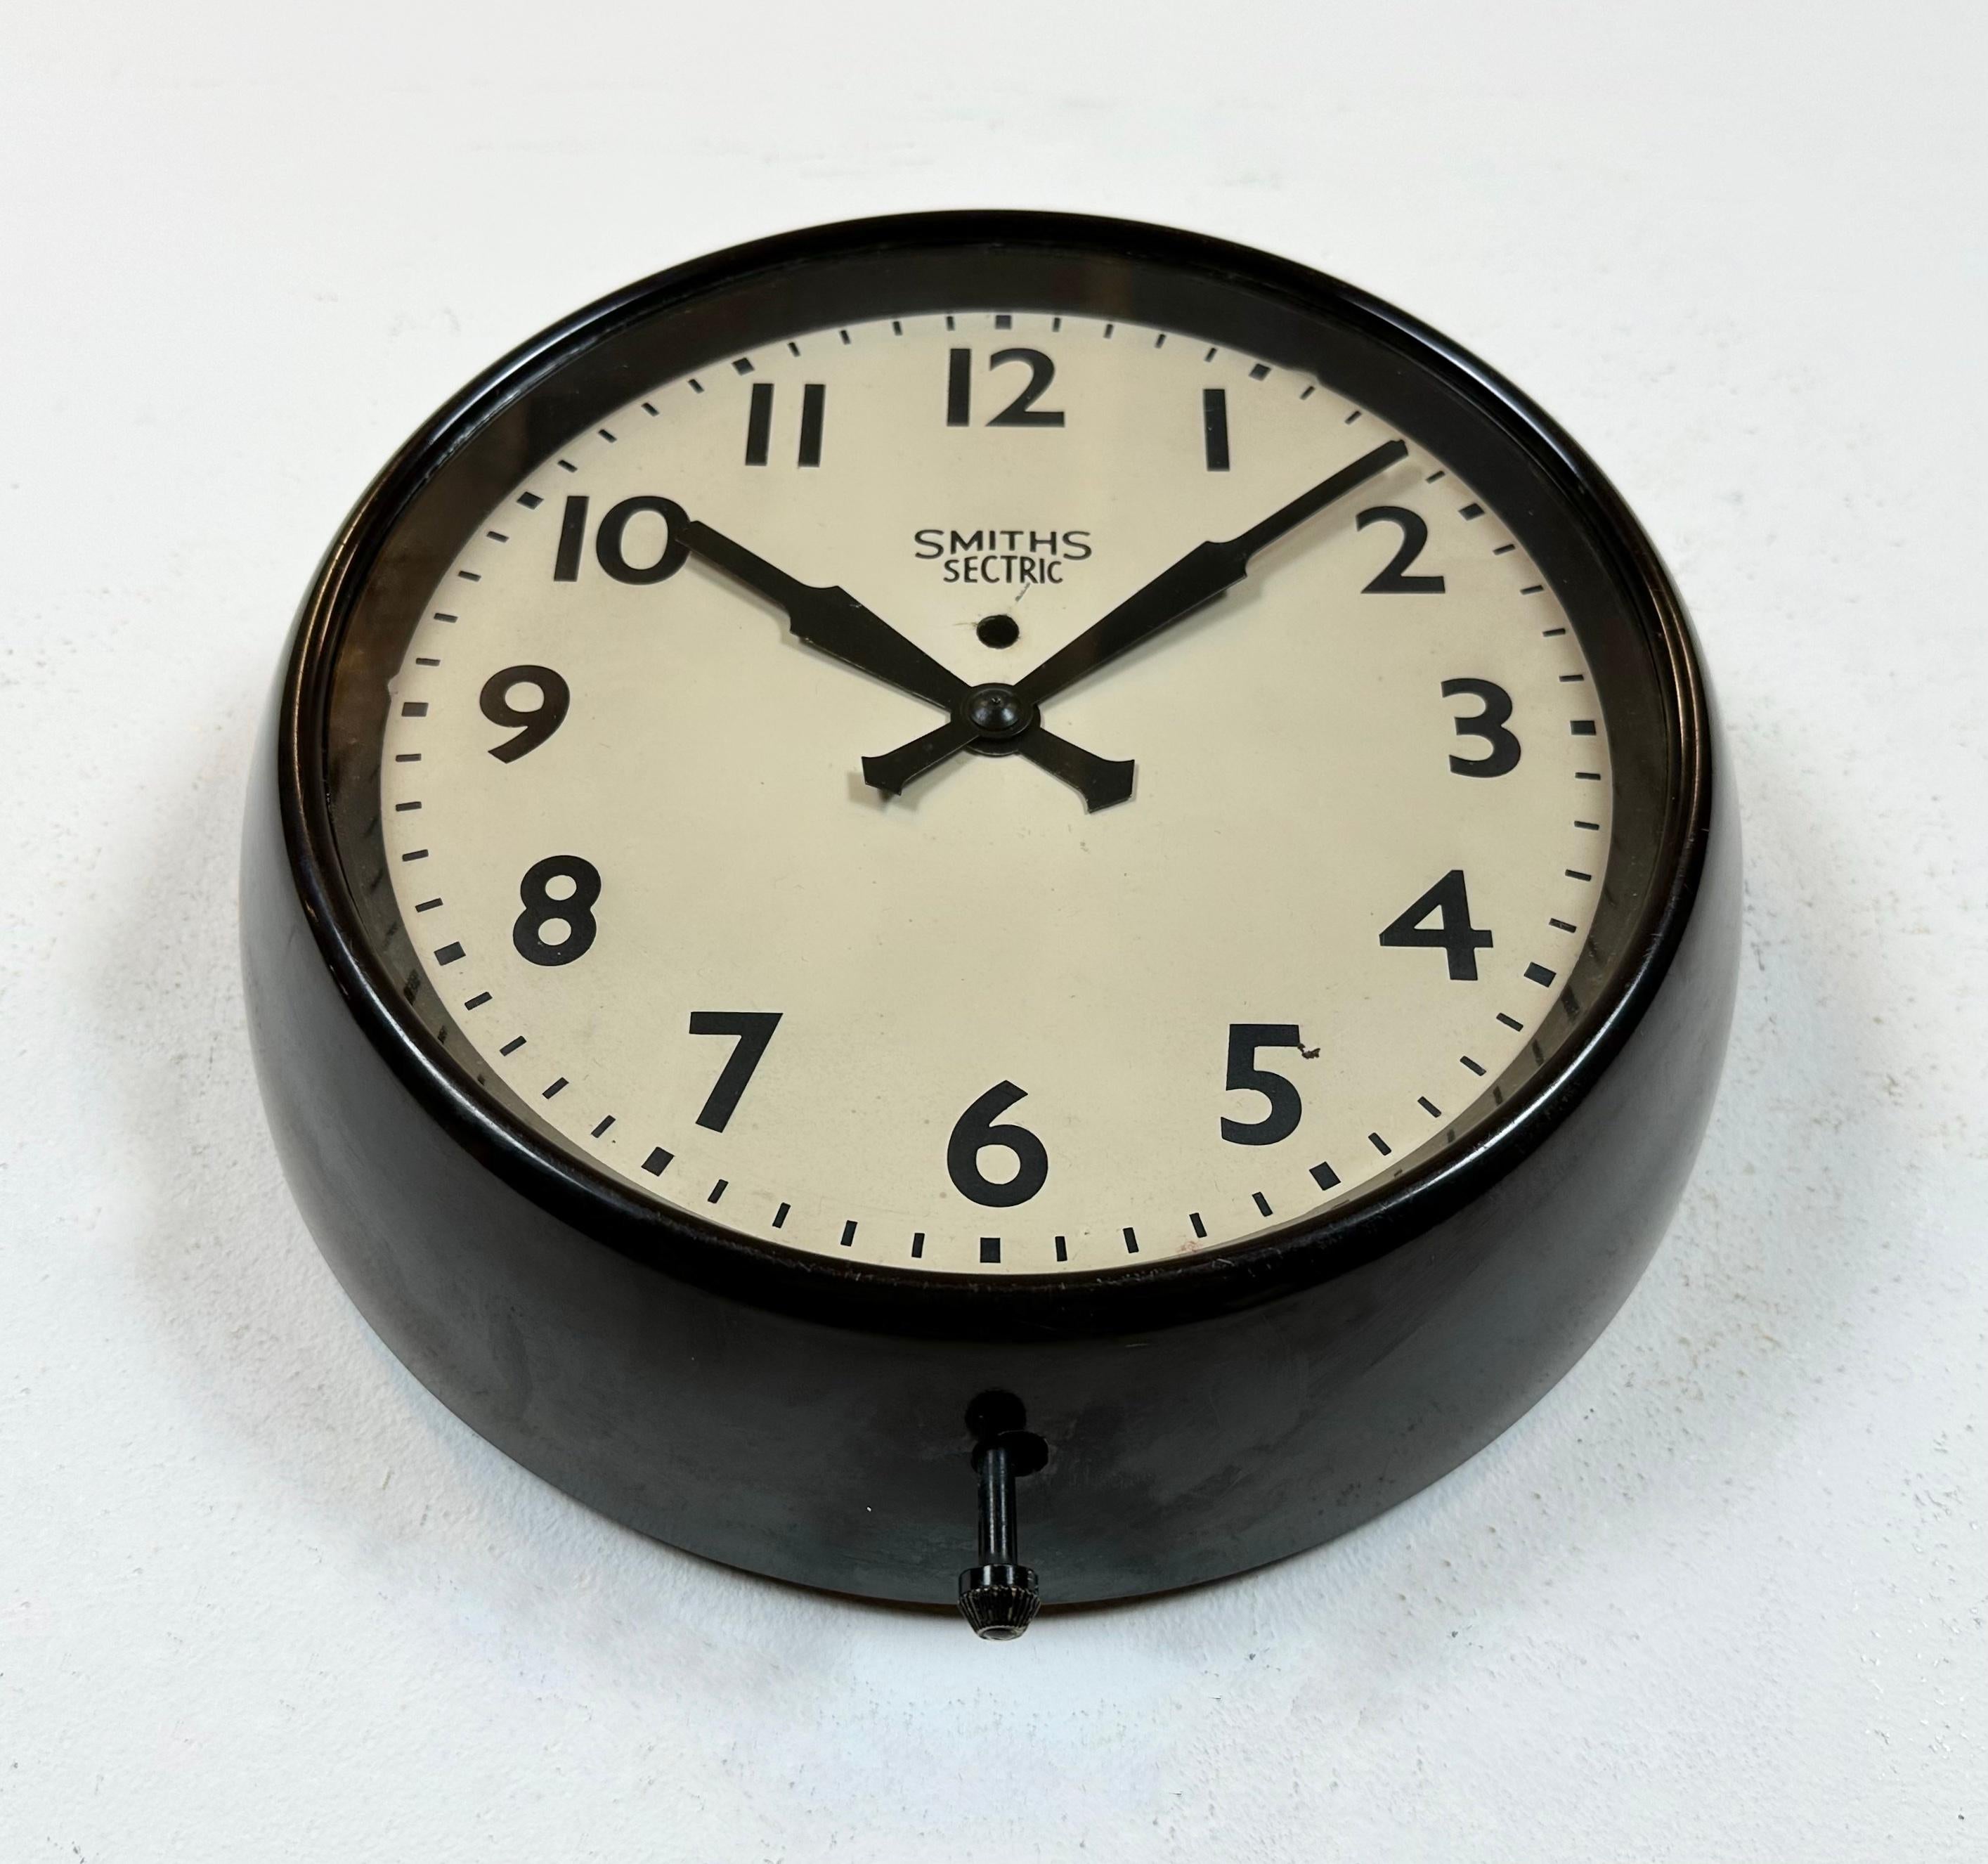 20th Century Vintage Brown Bakelite Electric Wall Clock from Smiths Sectric, 1950s